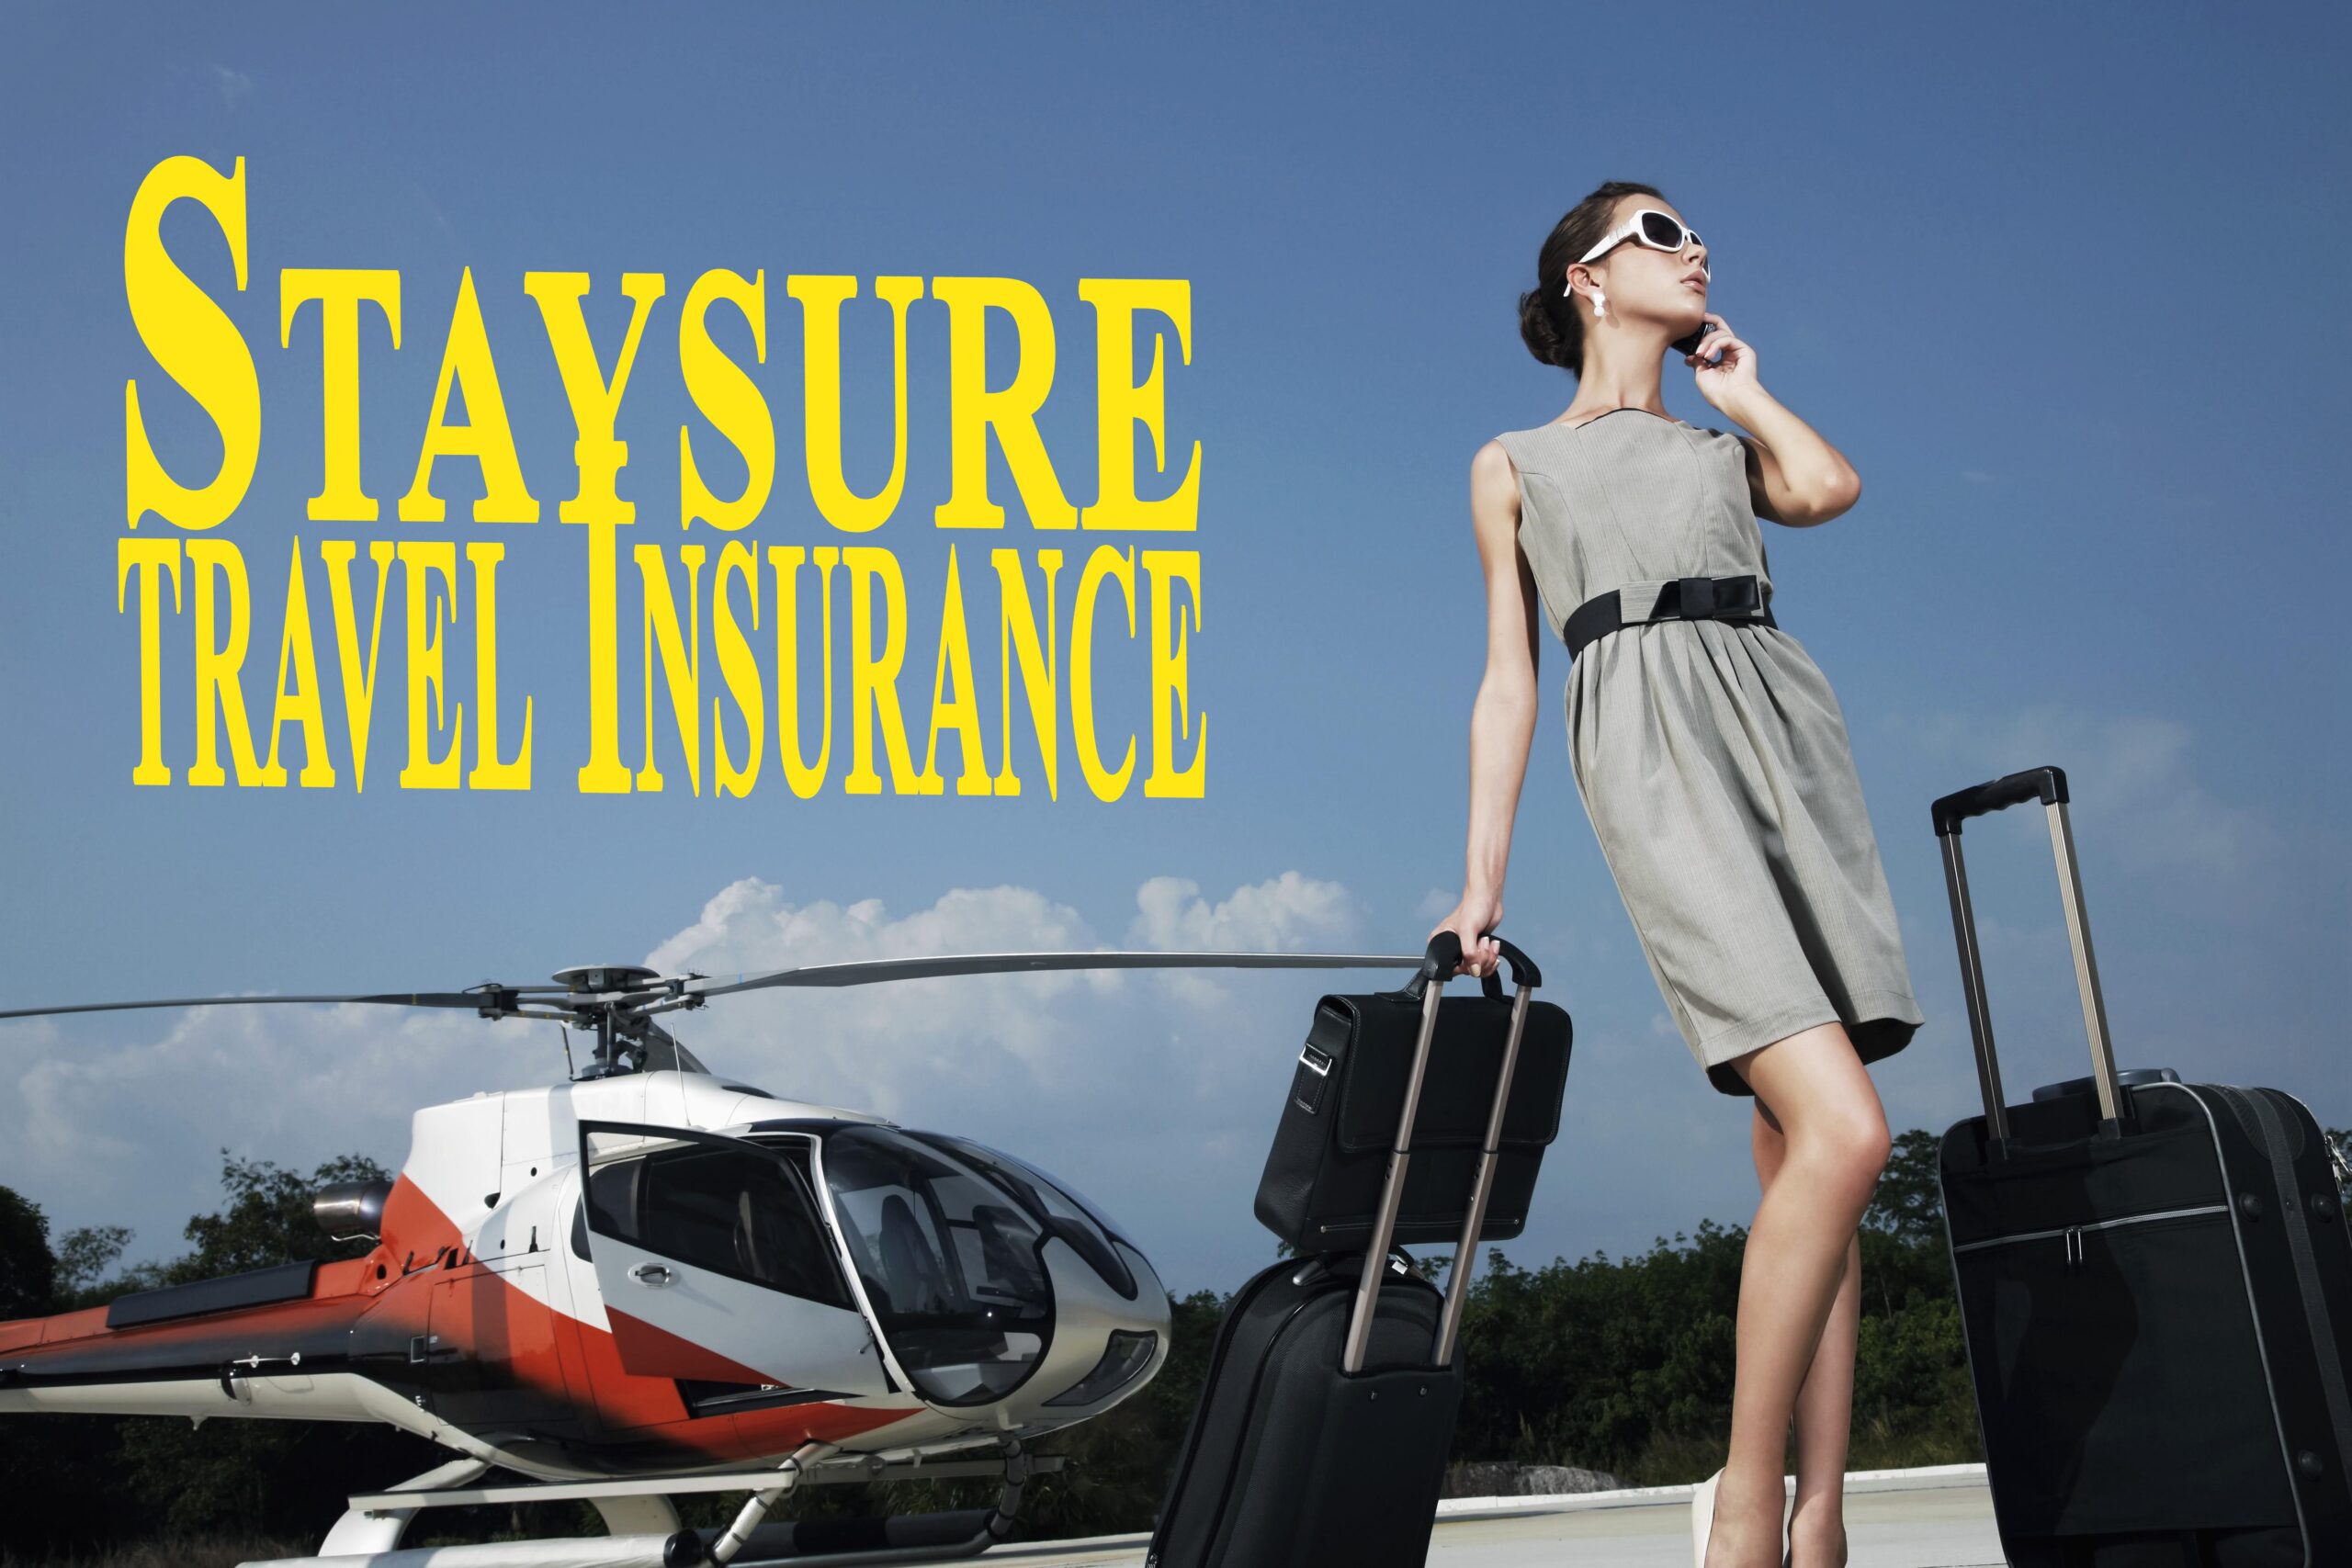 telephone number for staysure travel insurance free 0800